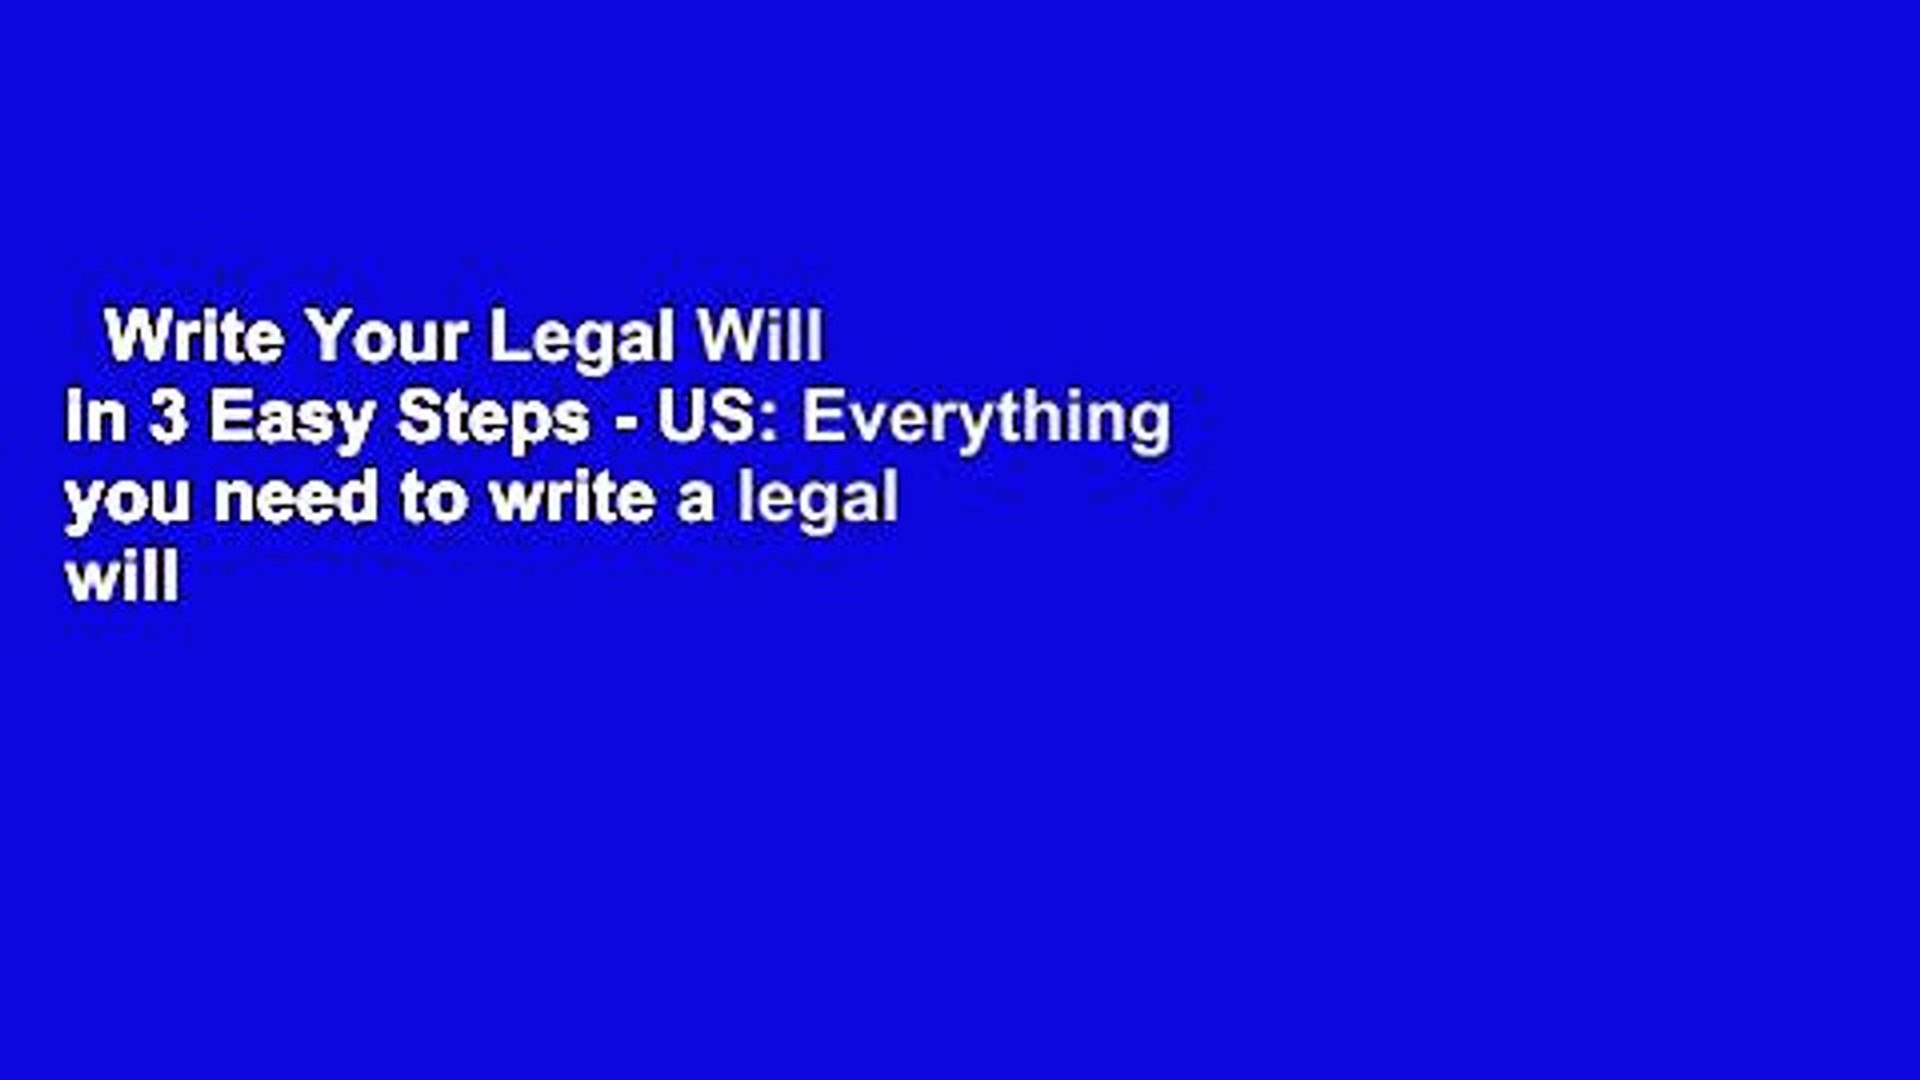 Write Your Legal Will in 25 Easy Steps - US: Everything you need to write a  legal will Best